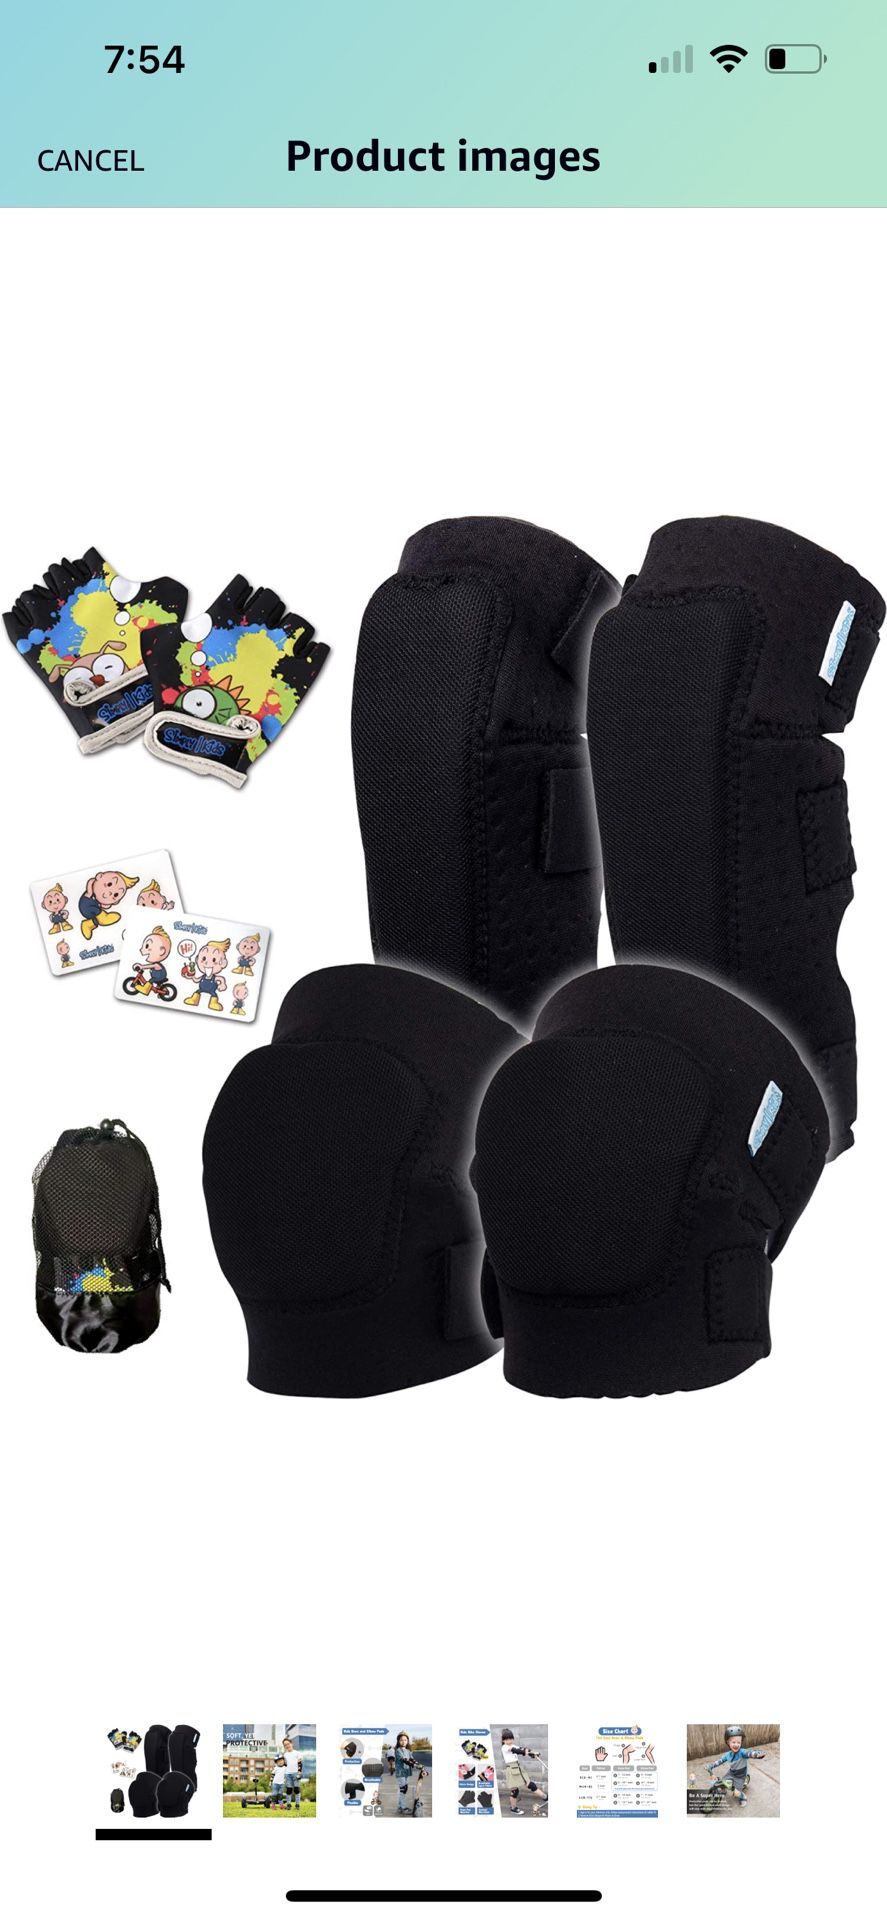 Soft Kids Knee and Elbow Pads with Bike Gloves I Comfortable Toddler Protective Gear Set